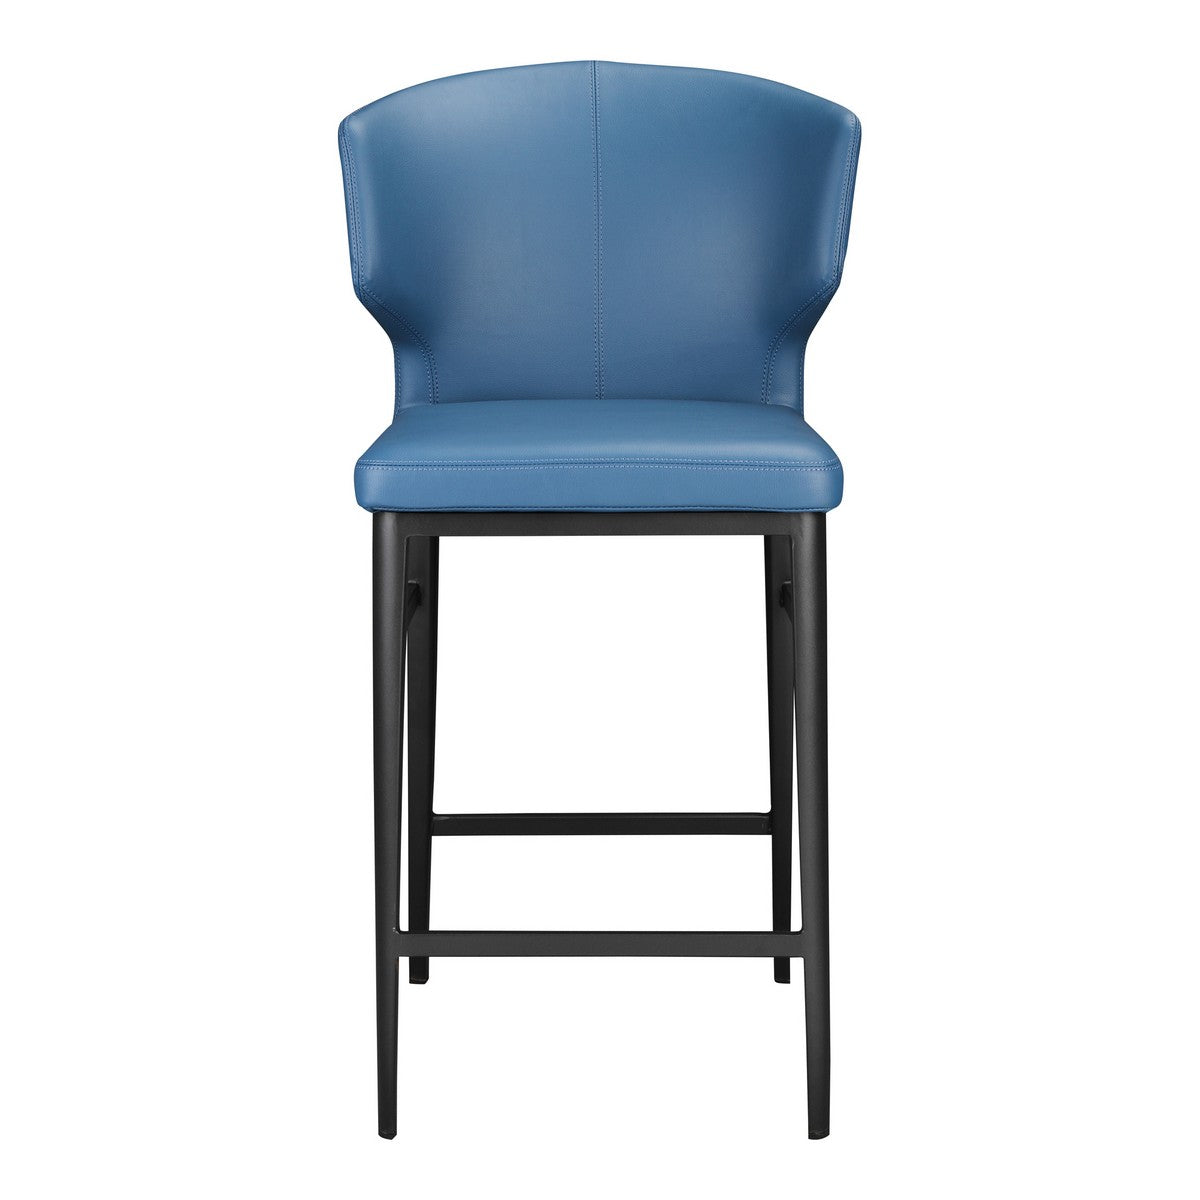 Moe's Home Collection Delaney Counter Stool Steel Blue - EJ-1022-28 - Moe's Home Collection - Counter Stools - Minimal And Modern - 1